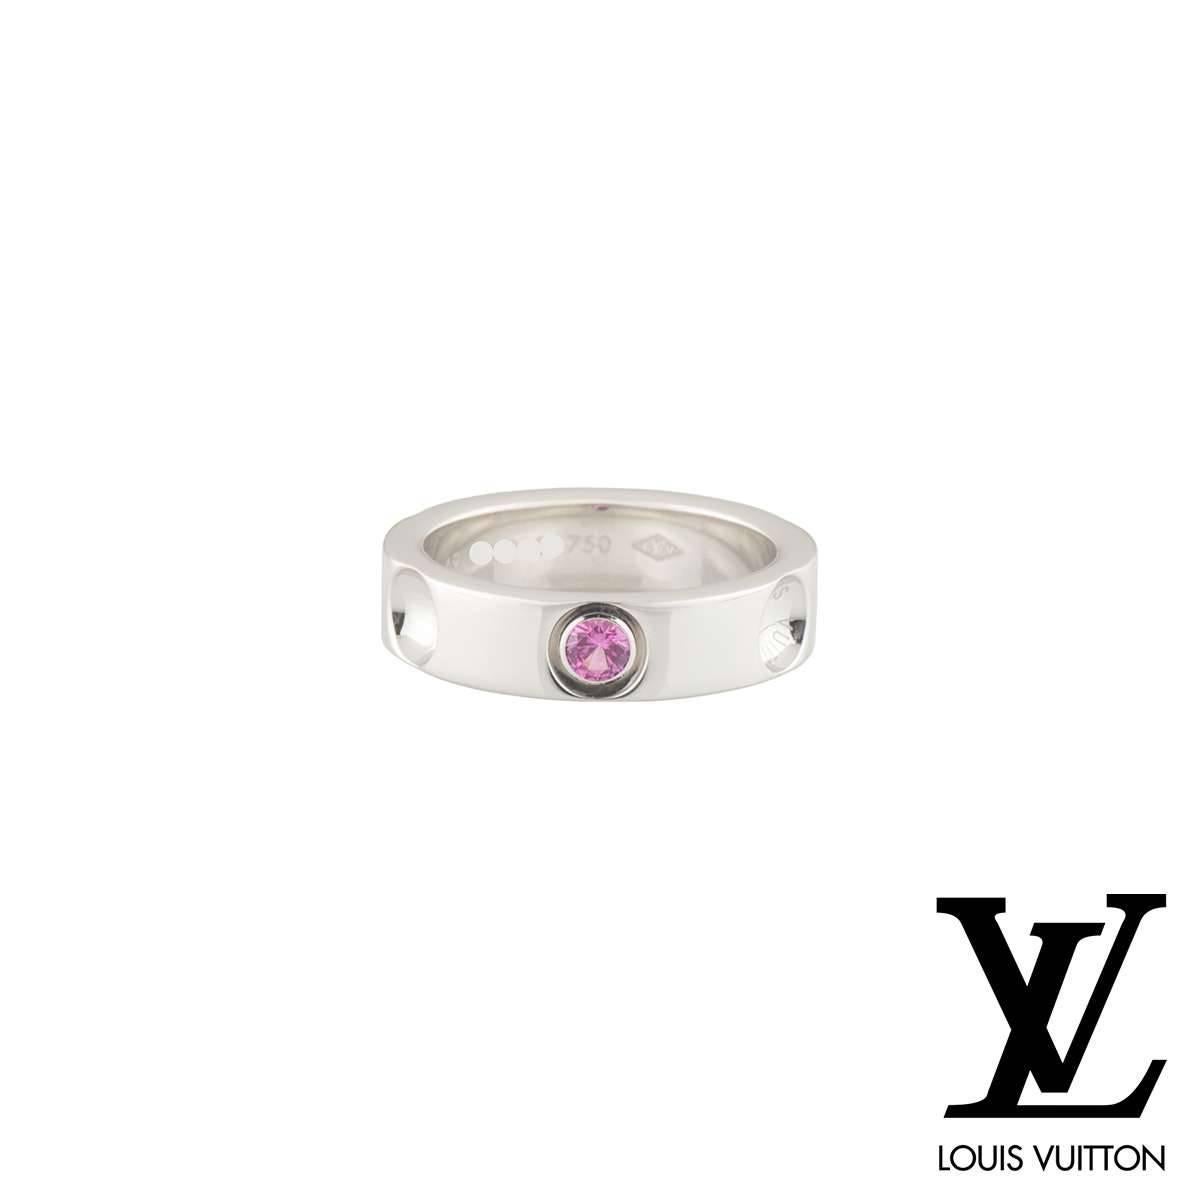 Louis Vuitton Pink Sapphire Empreinte Ring In Excellent Condition For Sale In London, GB